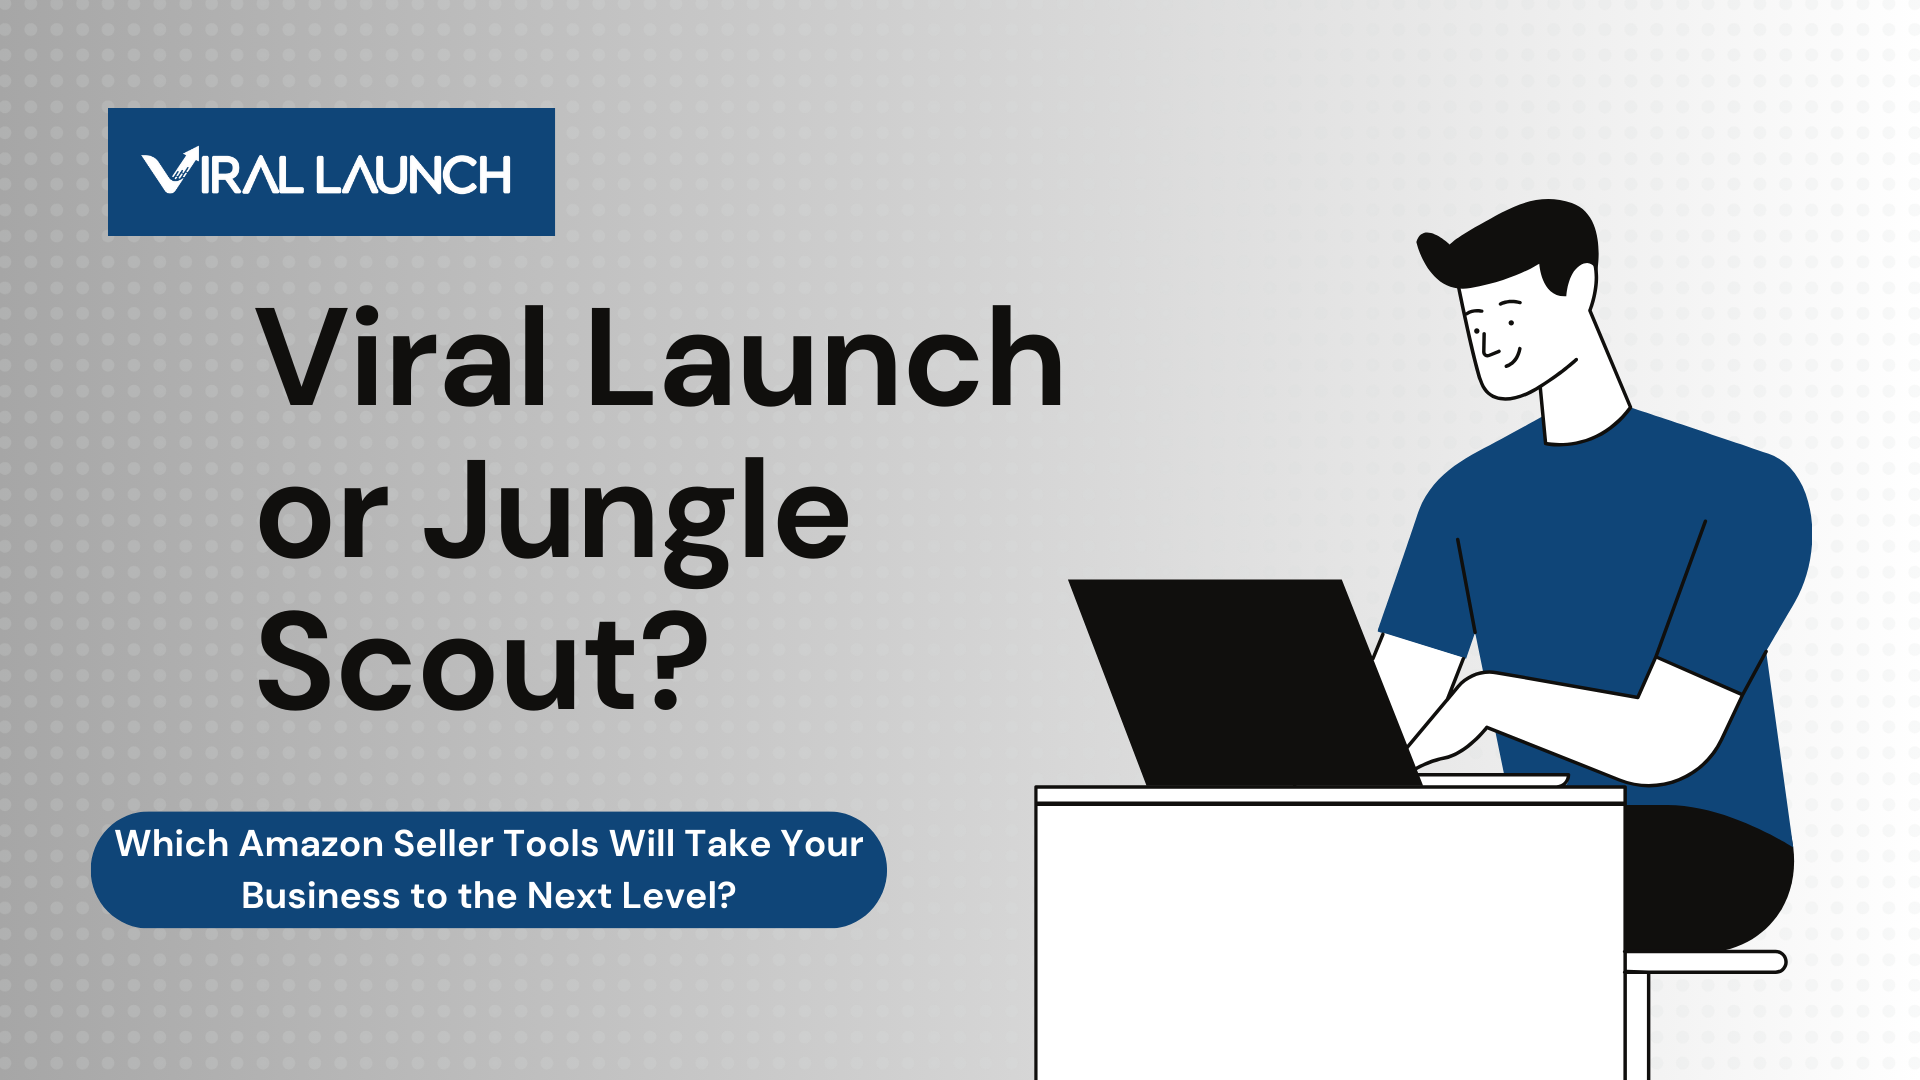 Viral Launch or Jungle Scout?